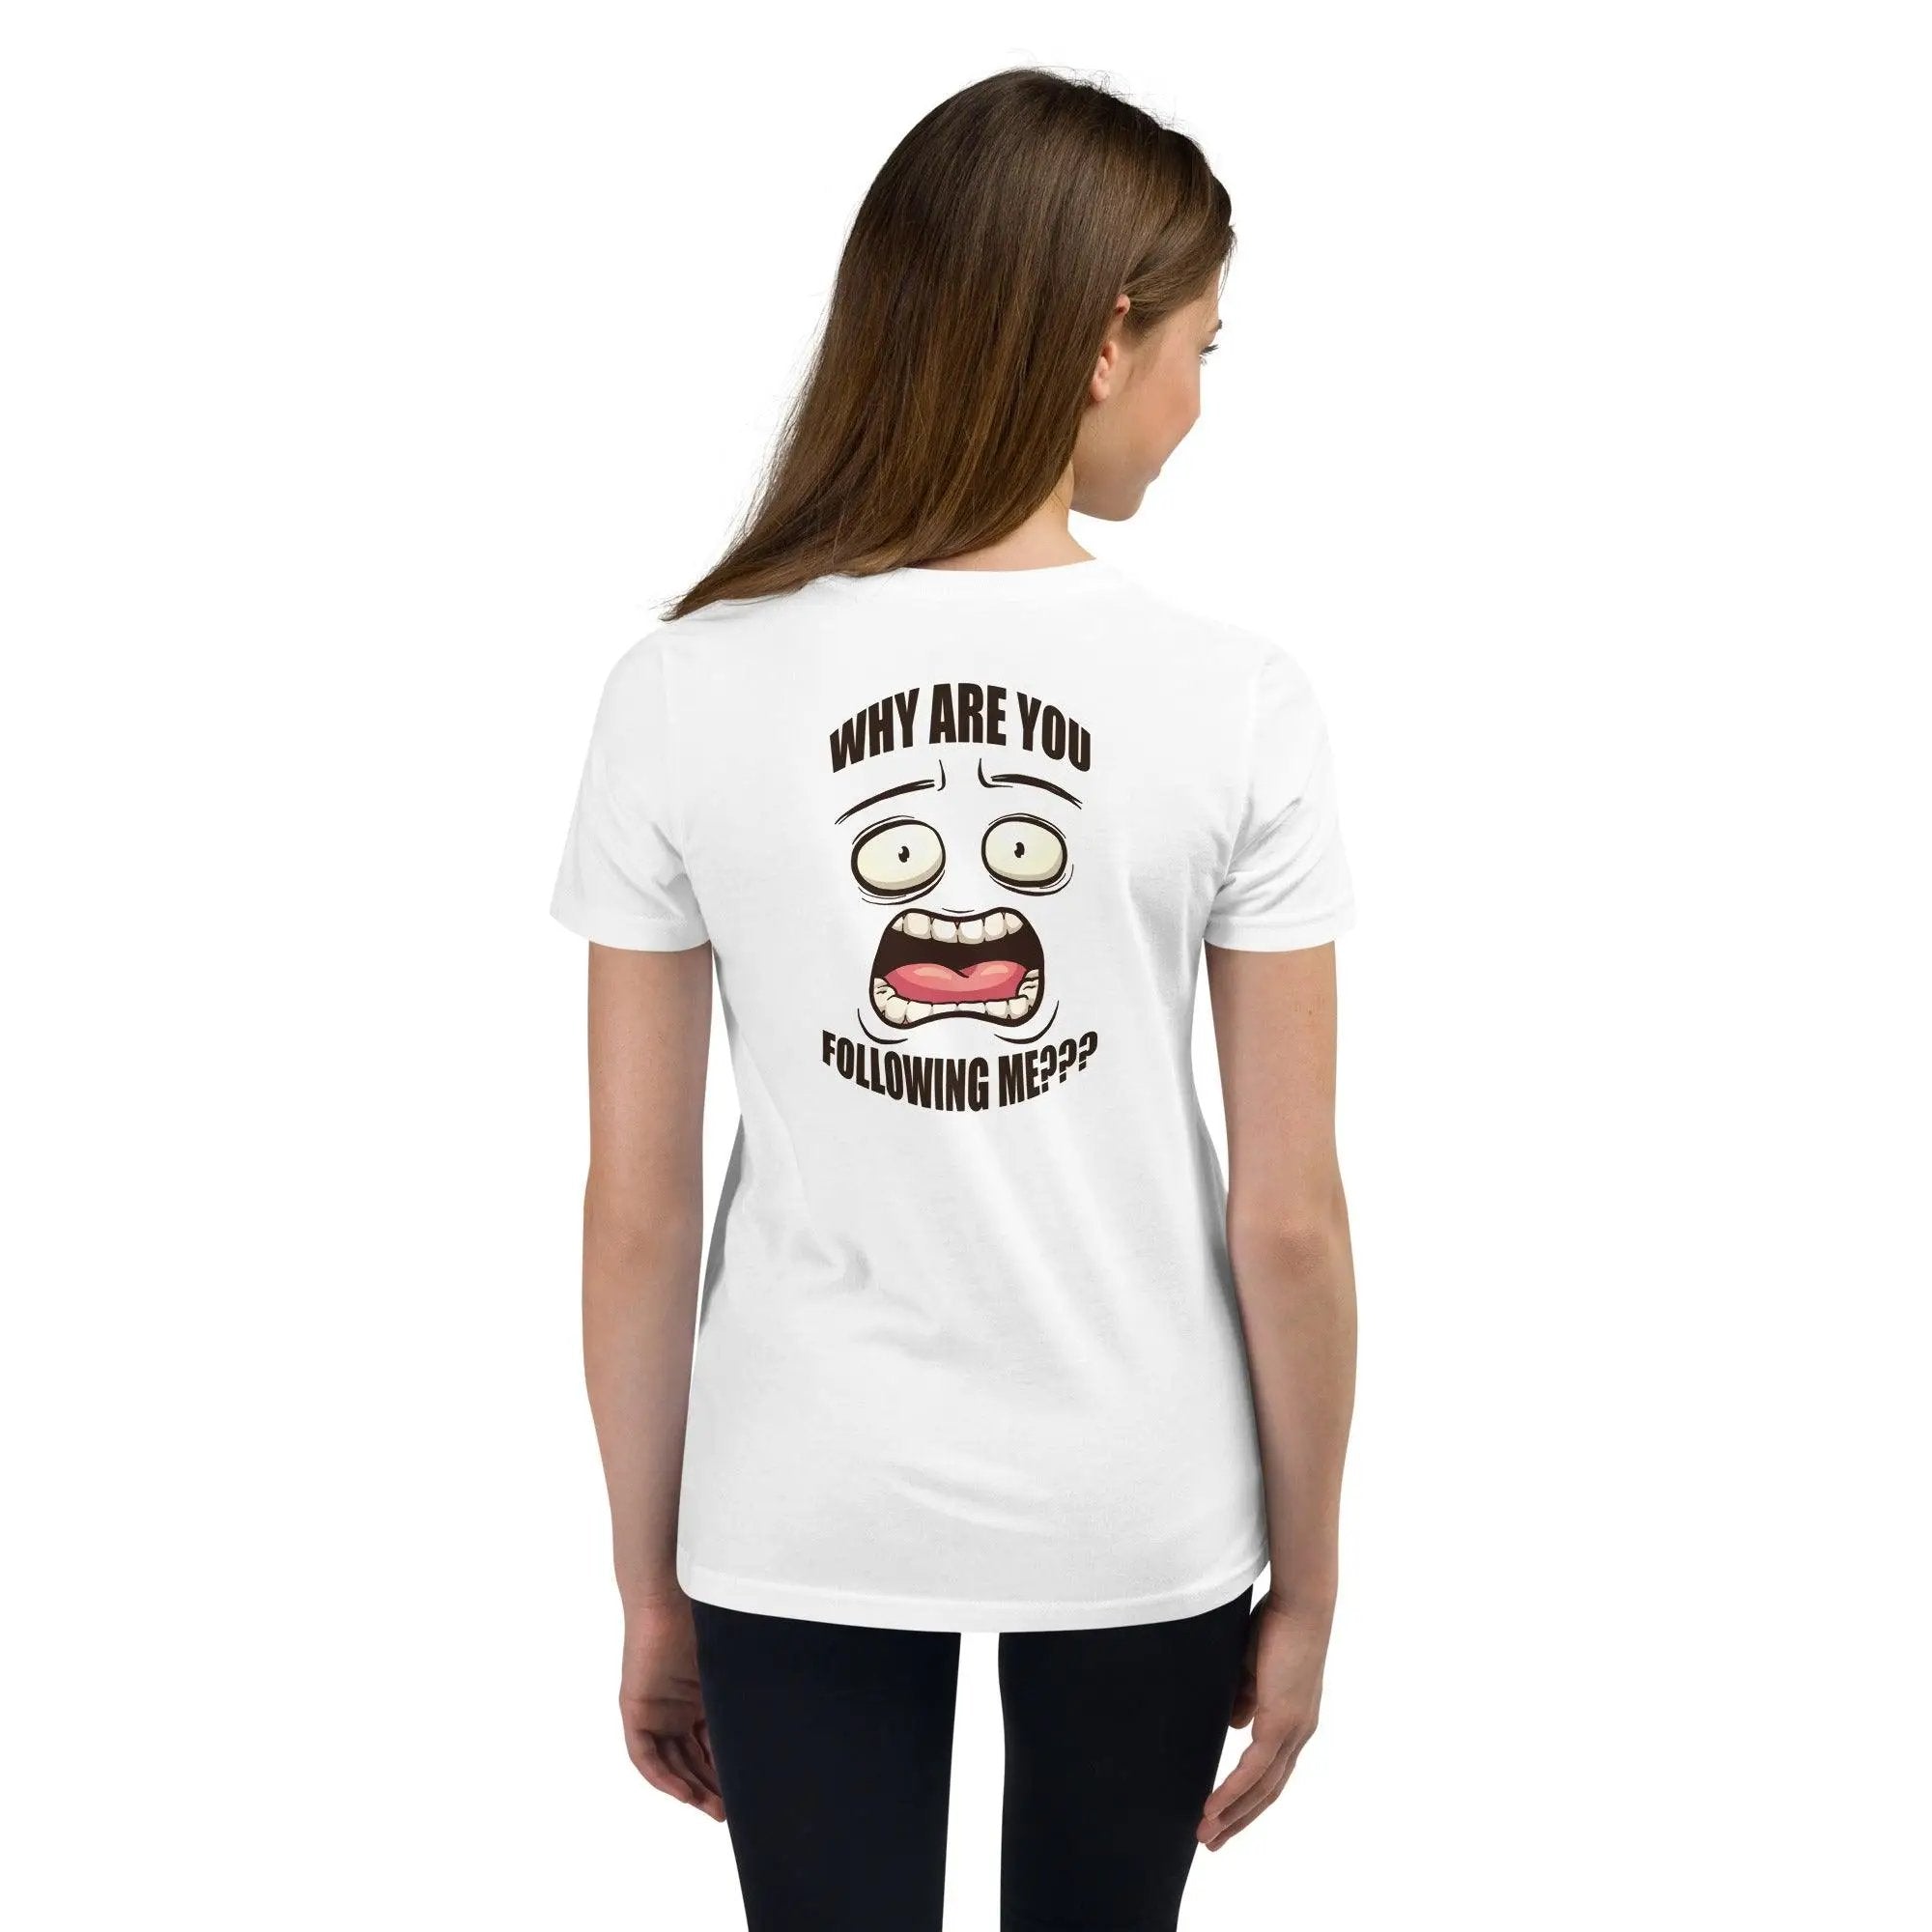 Why Are You Following Me? Youth Short Sleeve T-Shirt